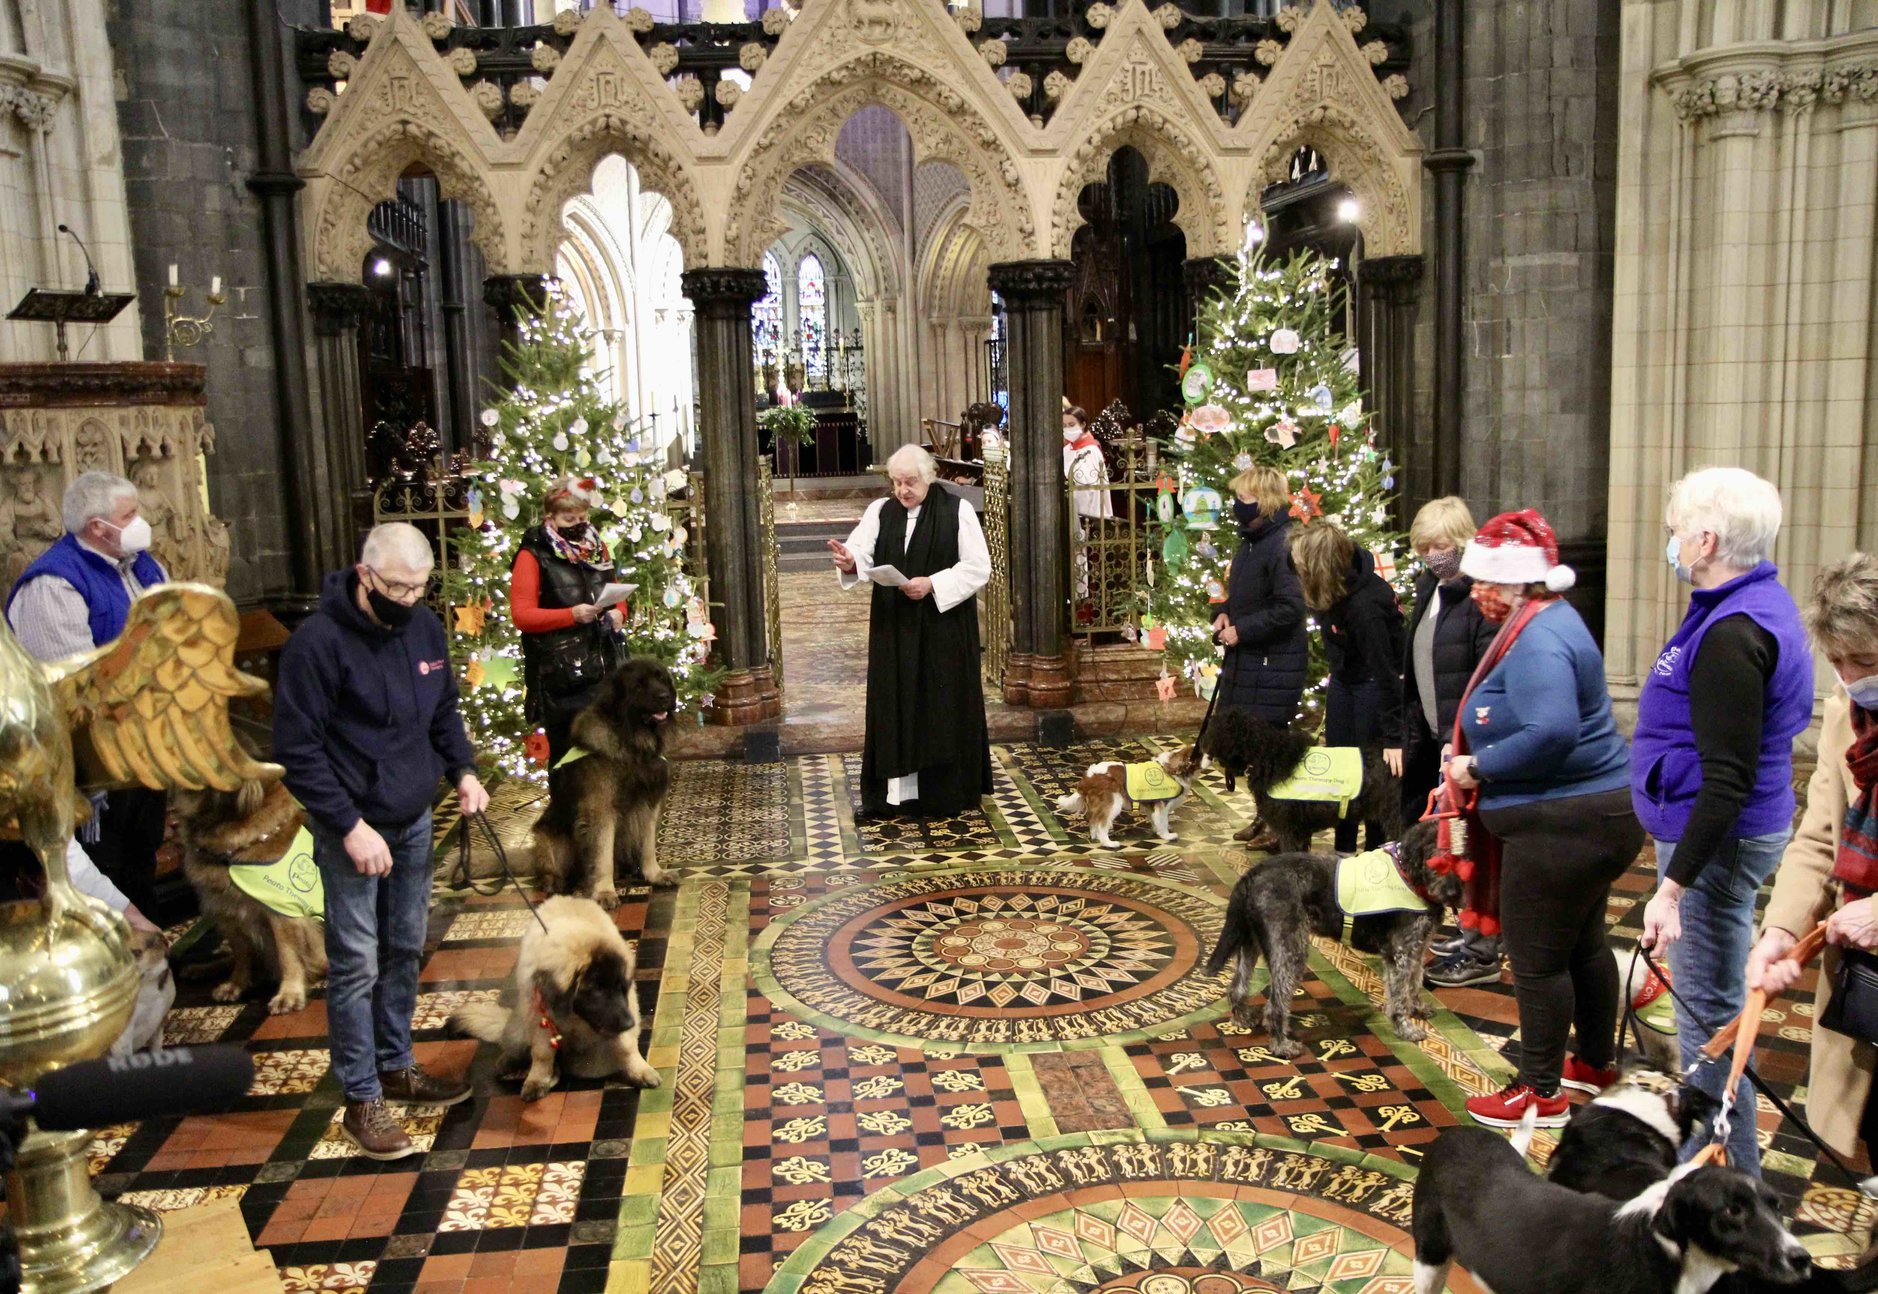 Archbishop Michael Jackson blessing the dogs during the Peata Therapy Dog Carol Service.